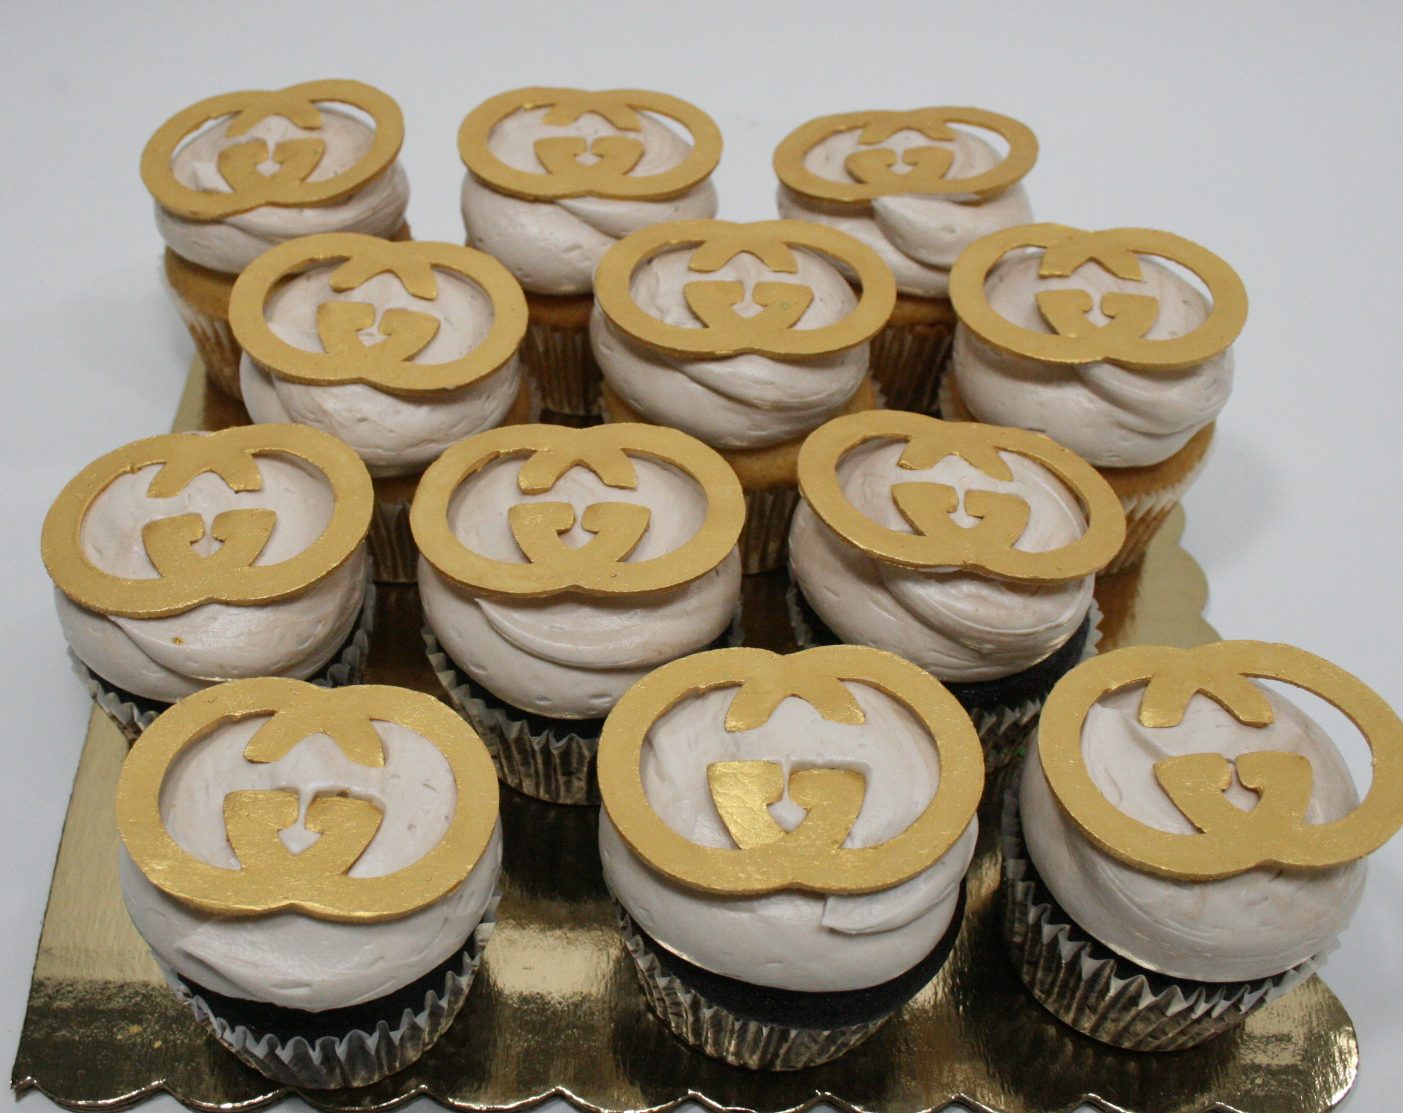 Gold Gucci cupcakes